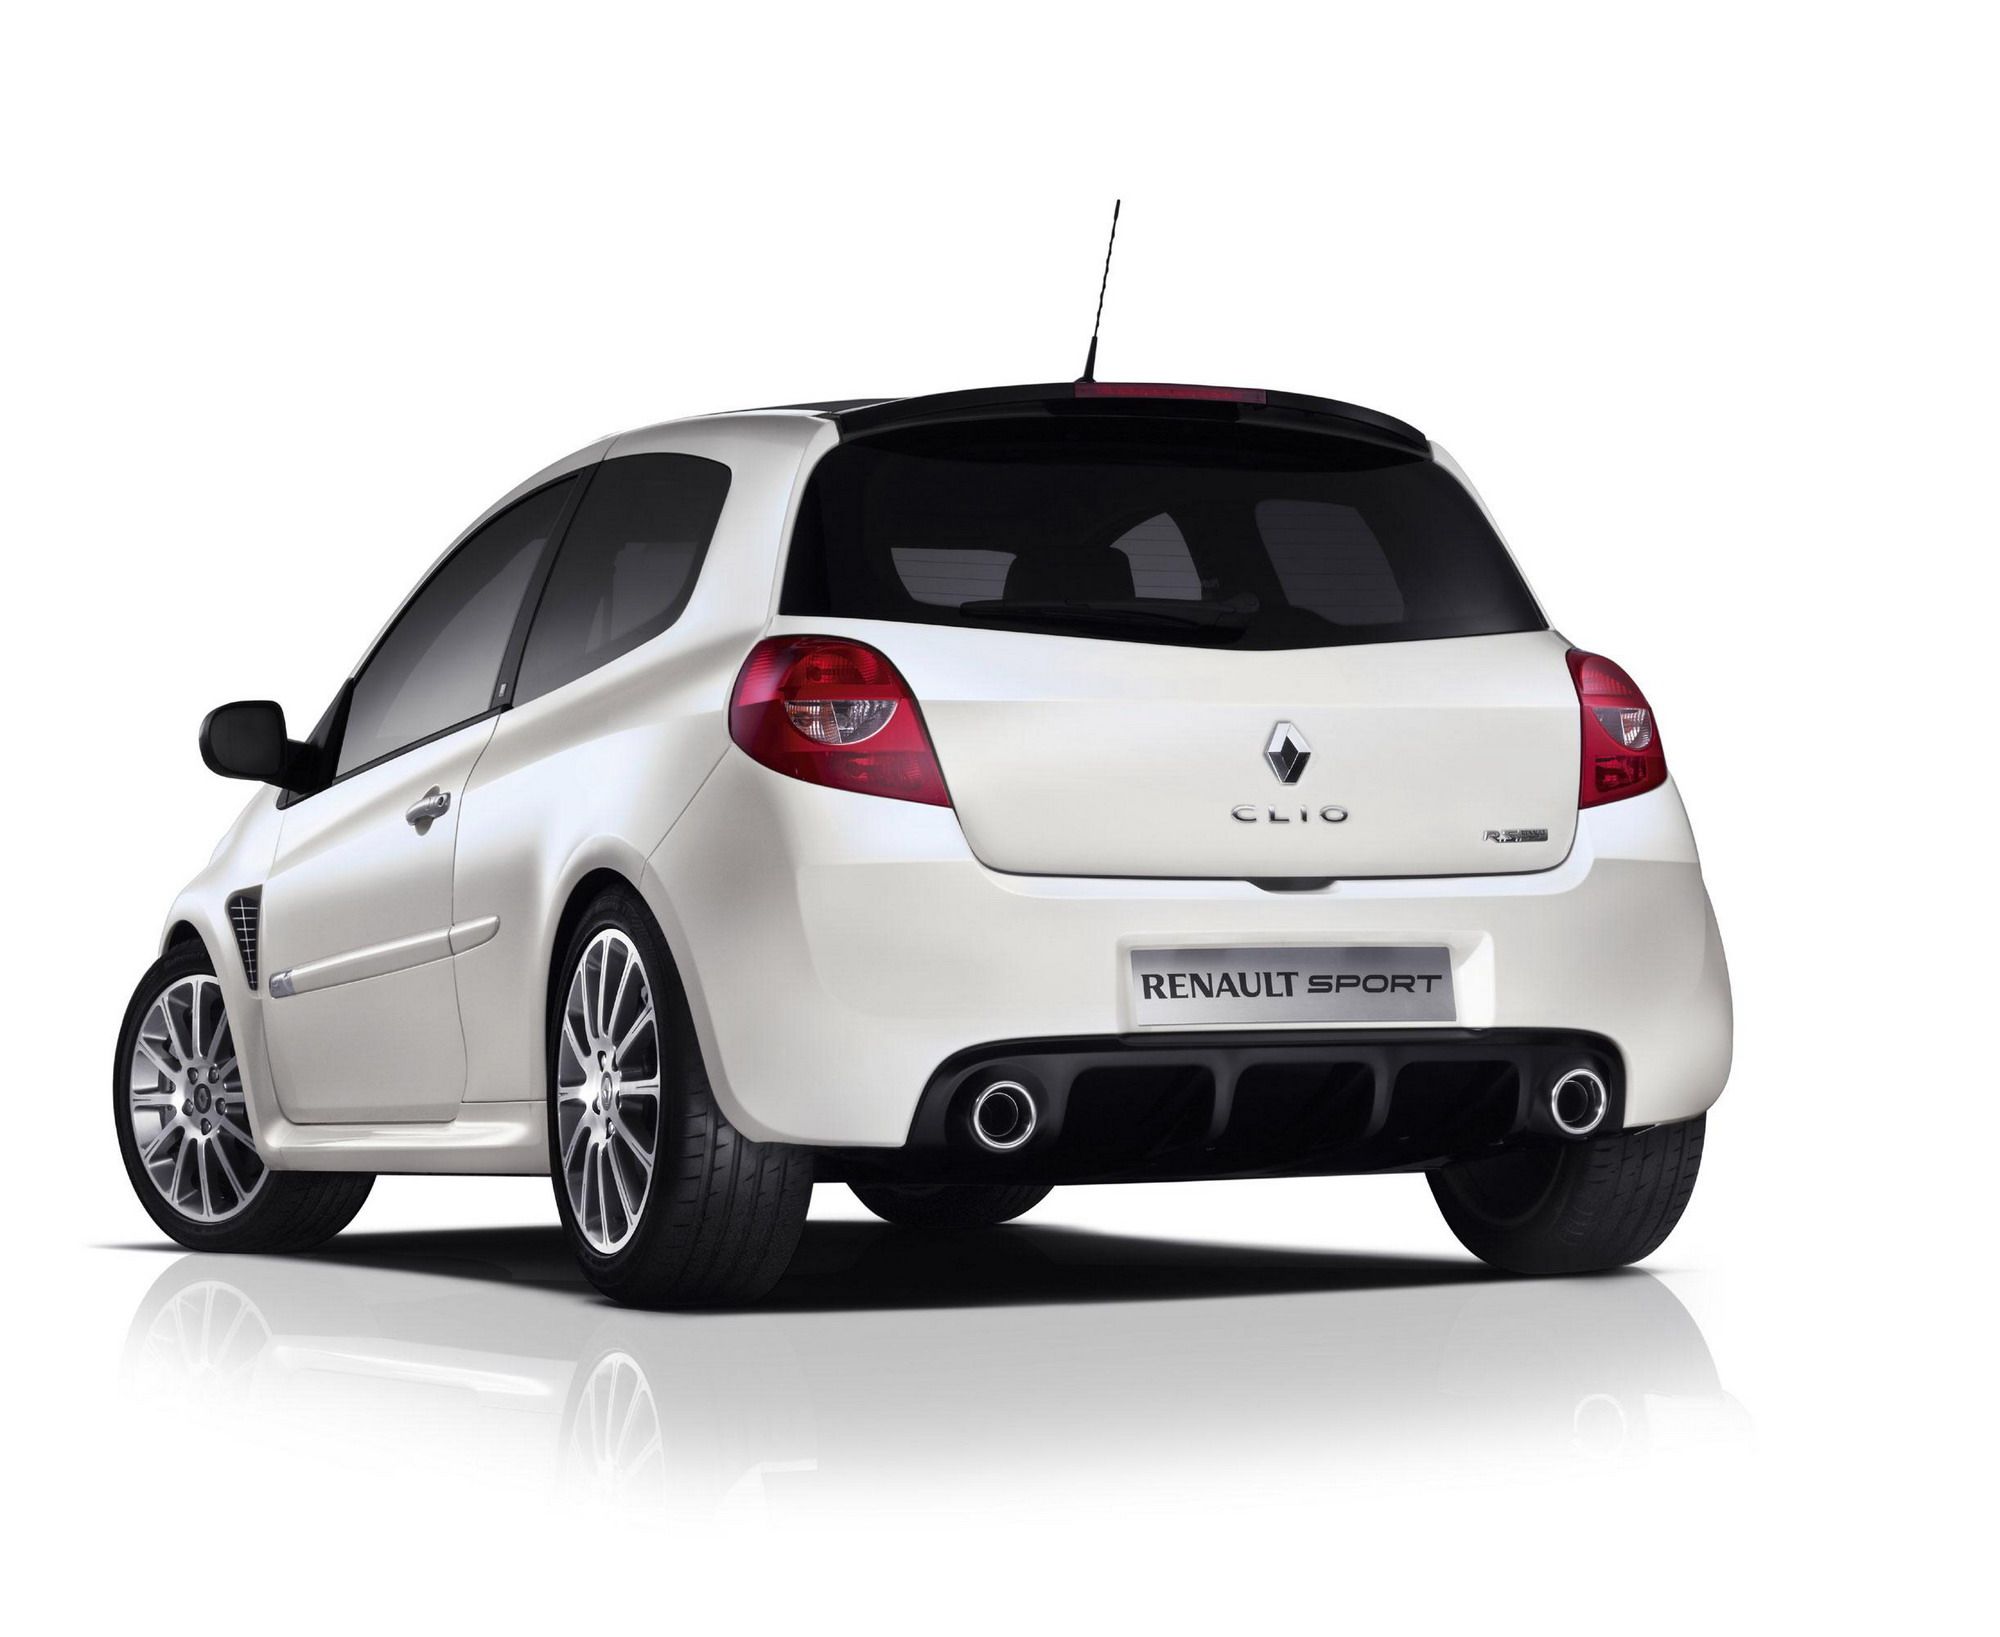 2010 Renault Clio RS 20th